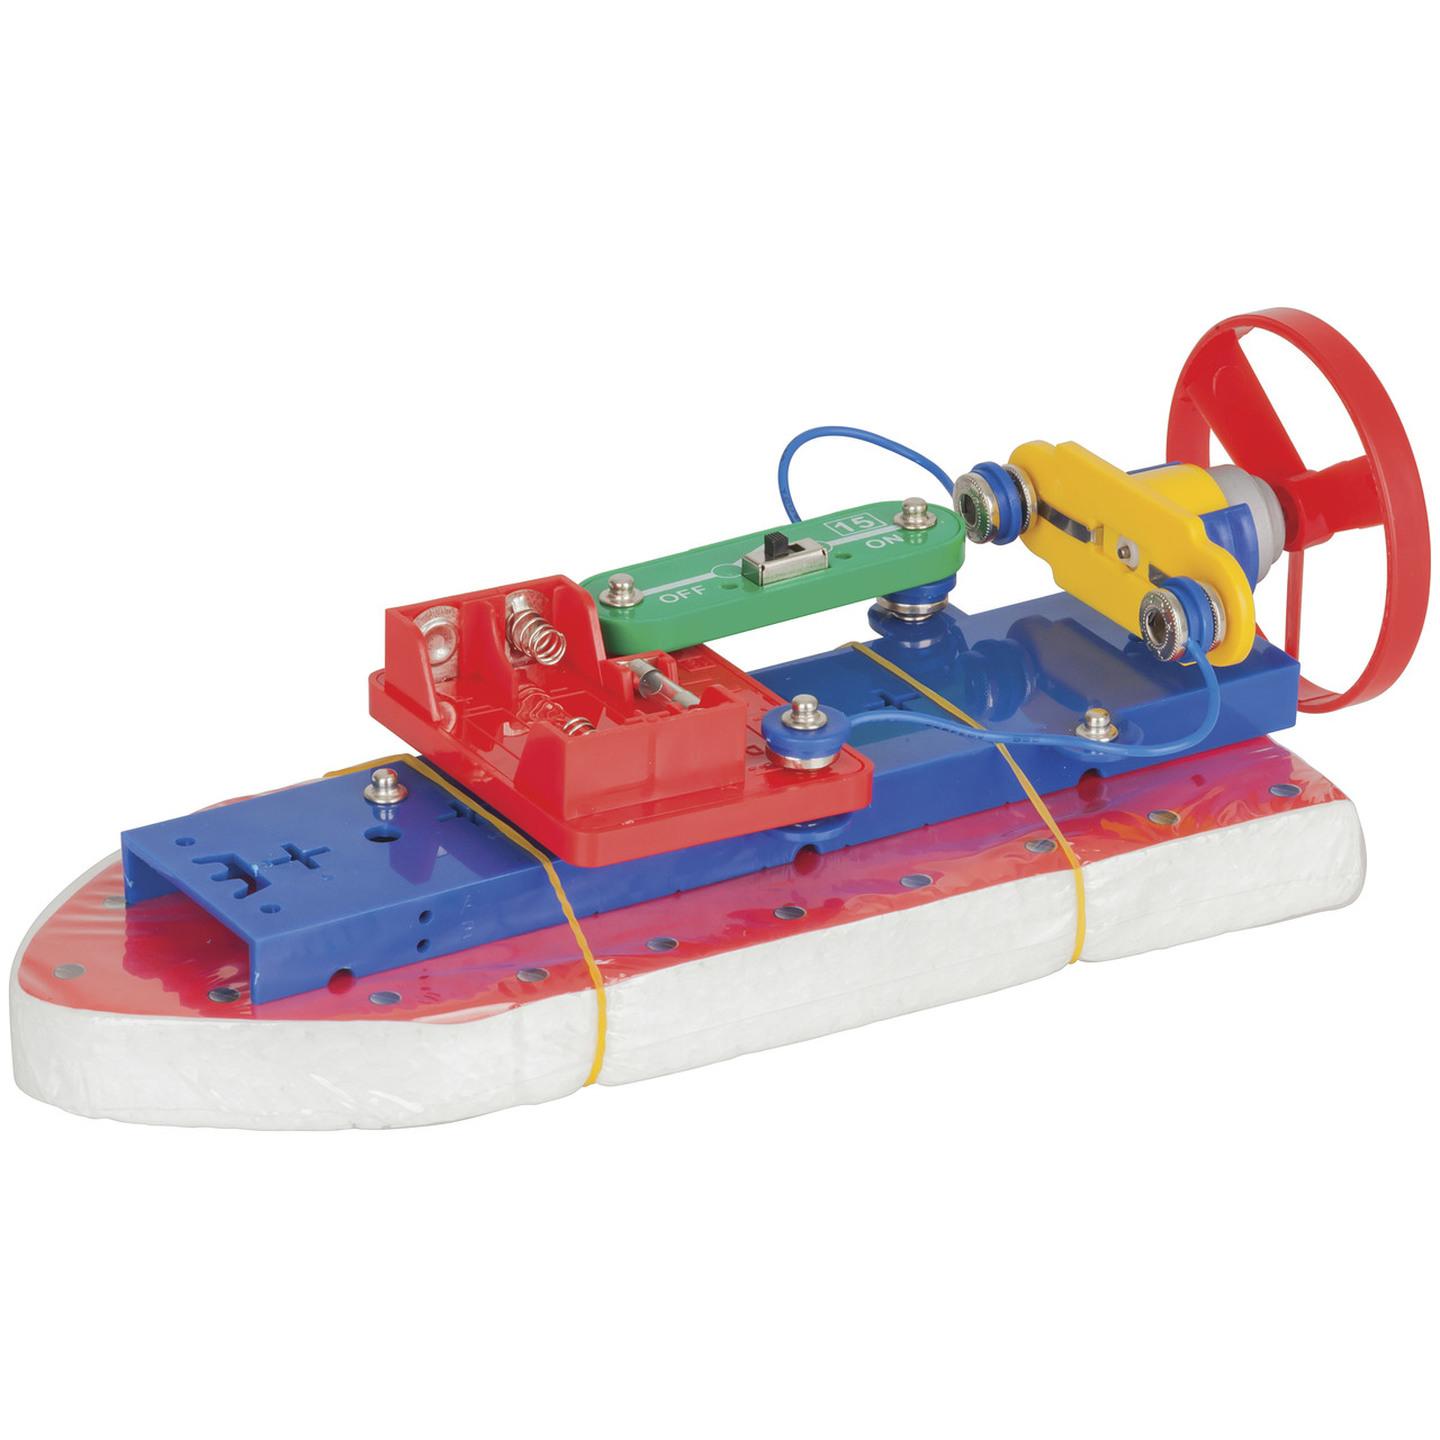 Air Boat Snap-on Electronic Project Kit